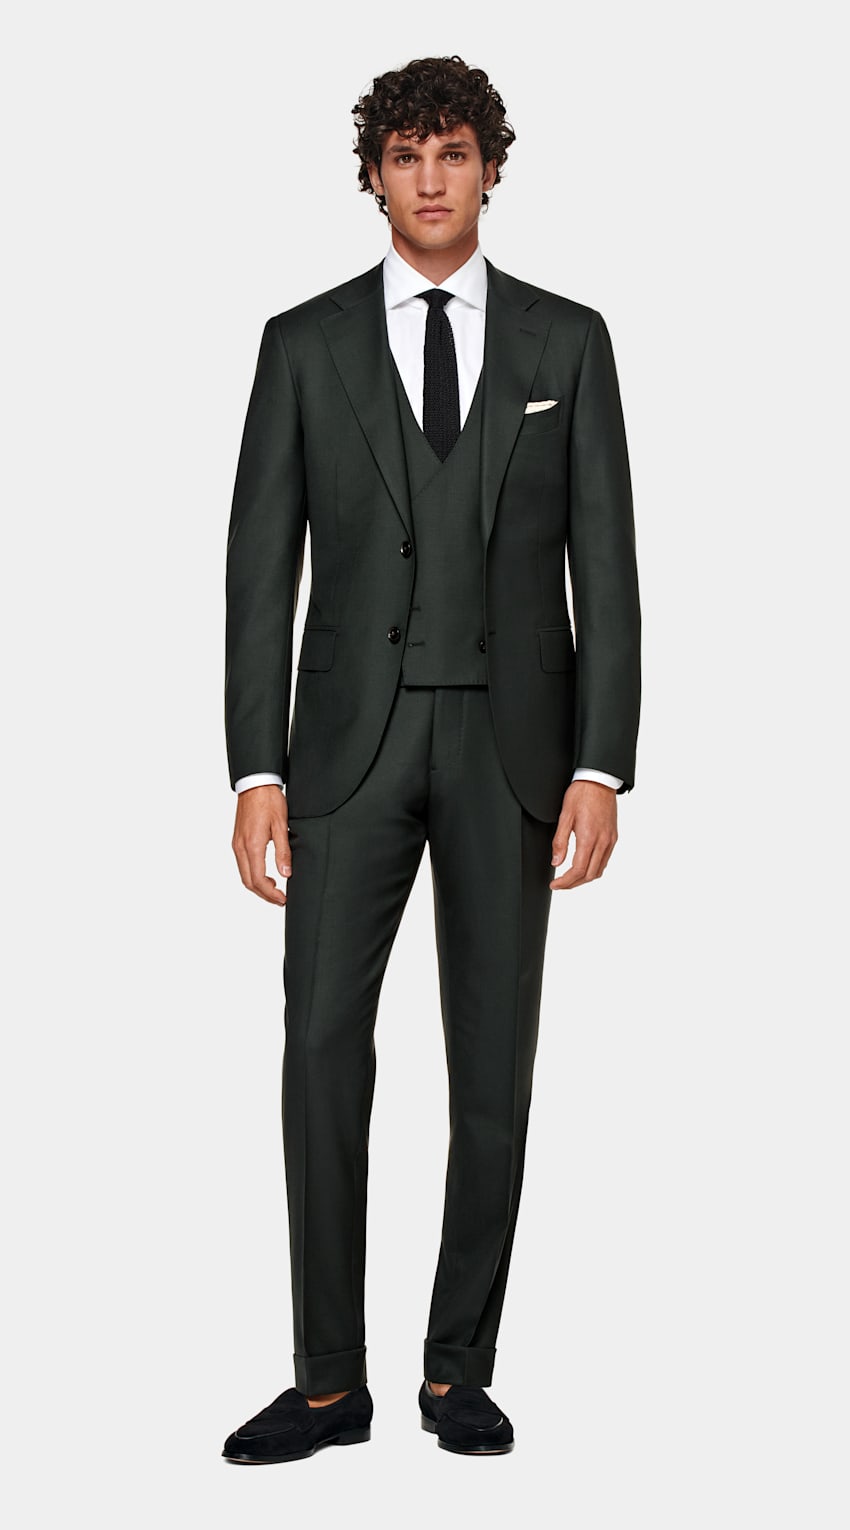 SUITSUPPLY Pure S150's Wool by Vitale Barberis Canonico, Italy Dark Green Three-Piece Tailored Fit Lazio Suit